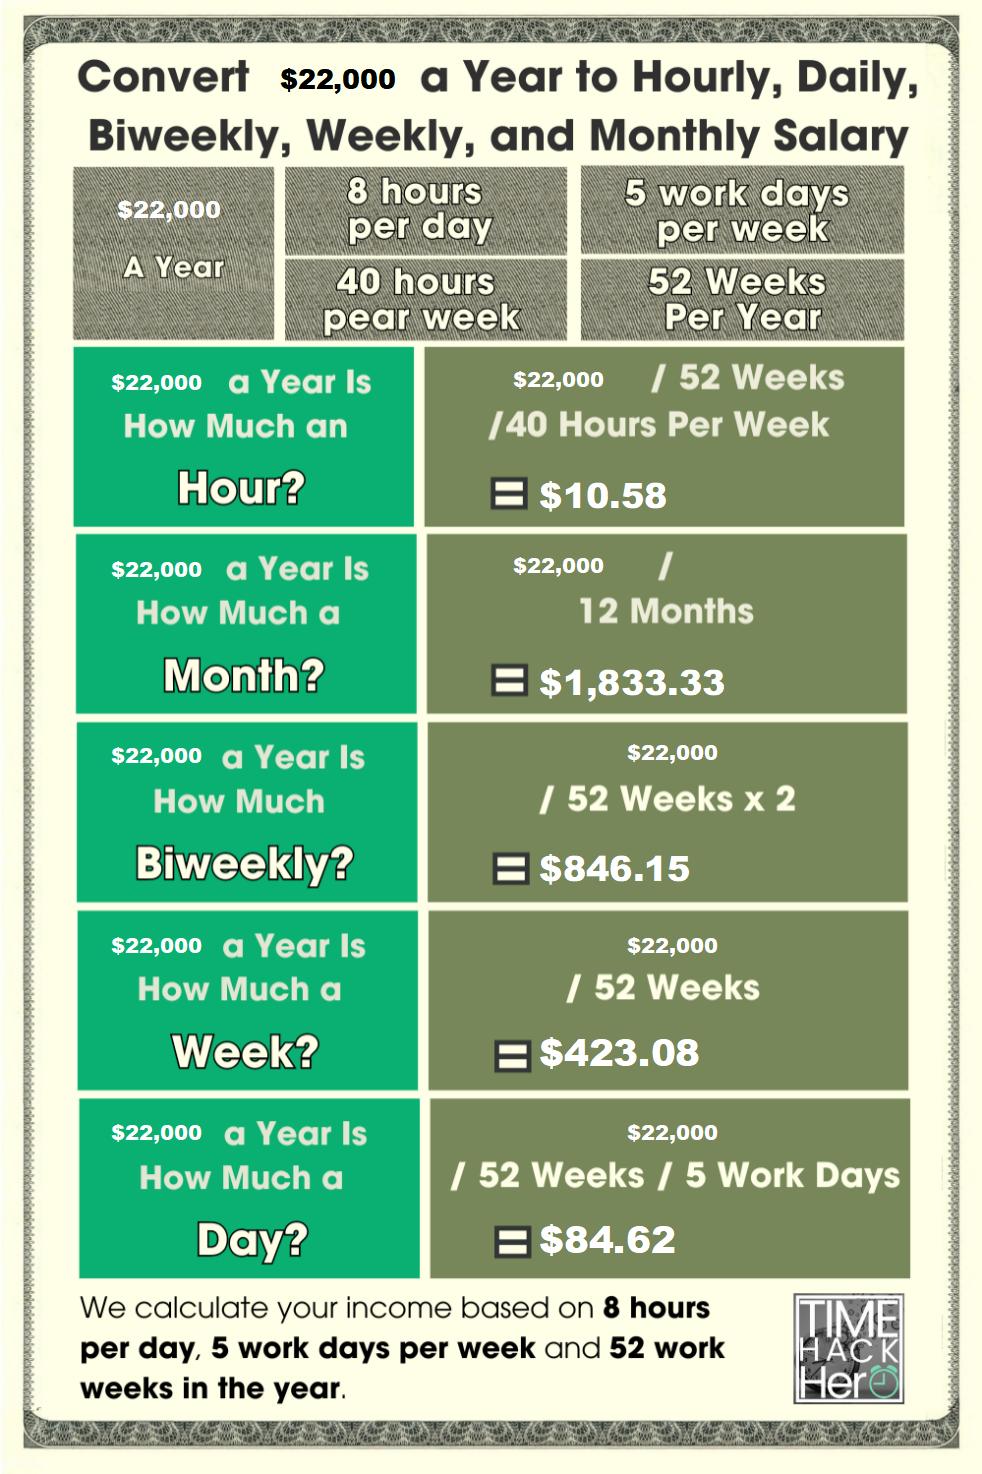 22k a year is how much an hour